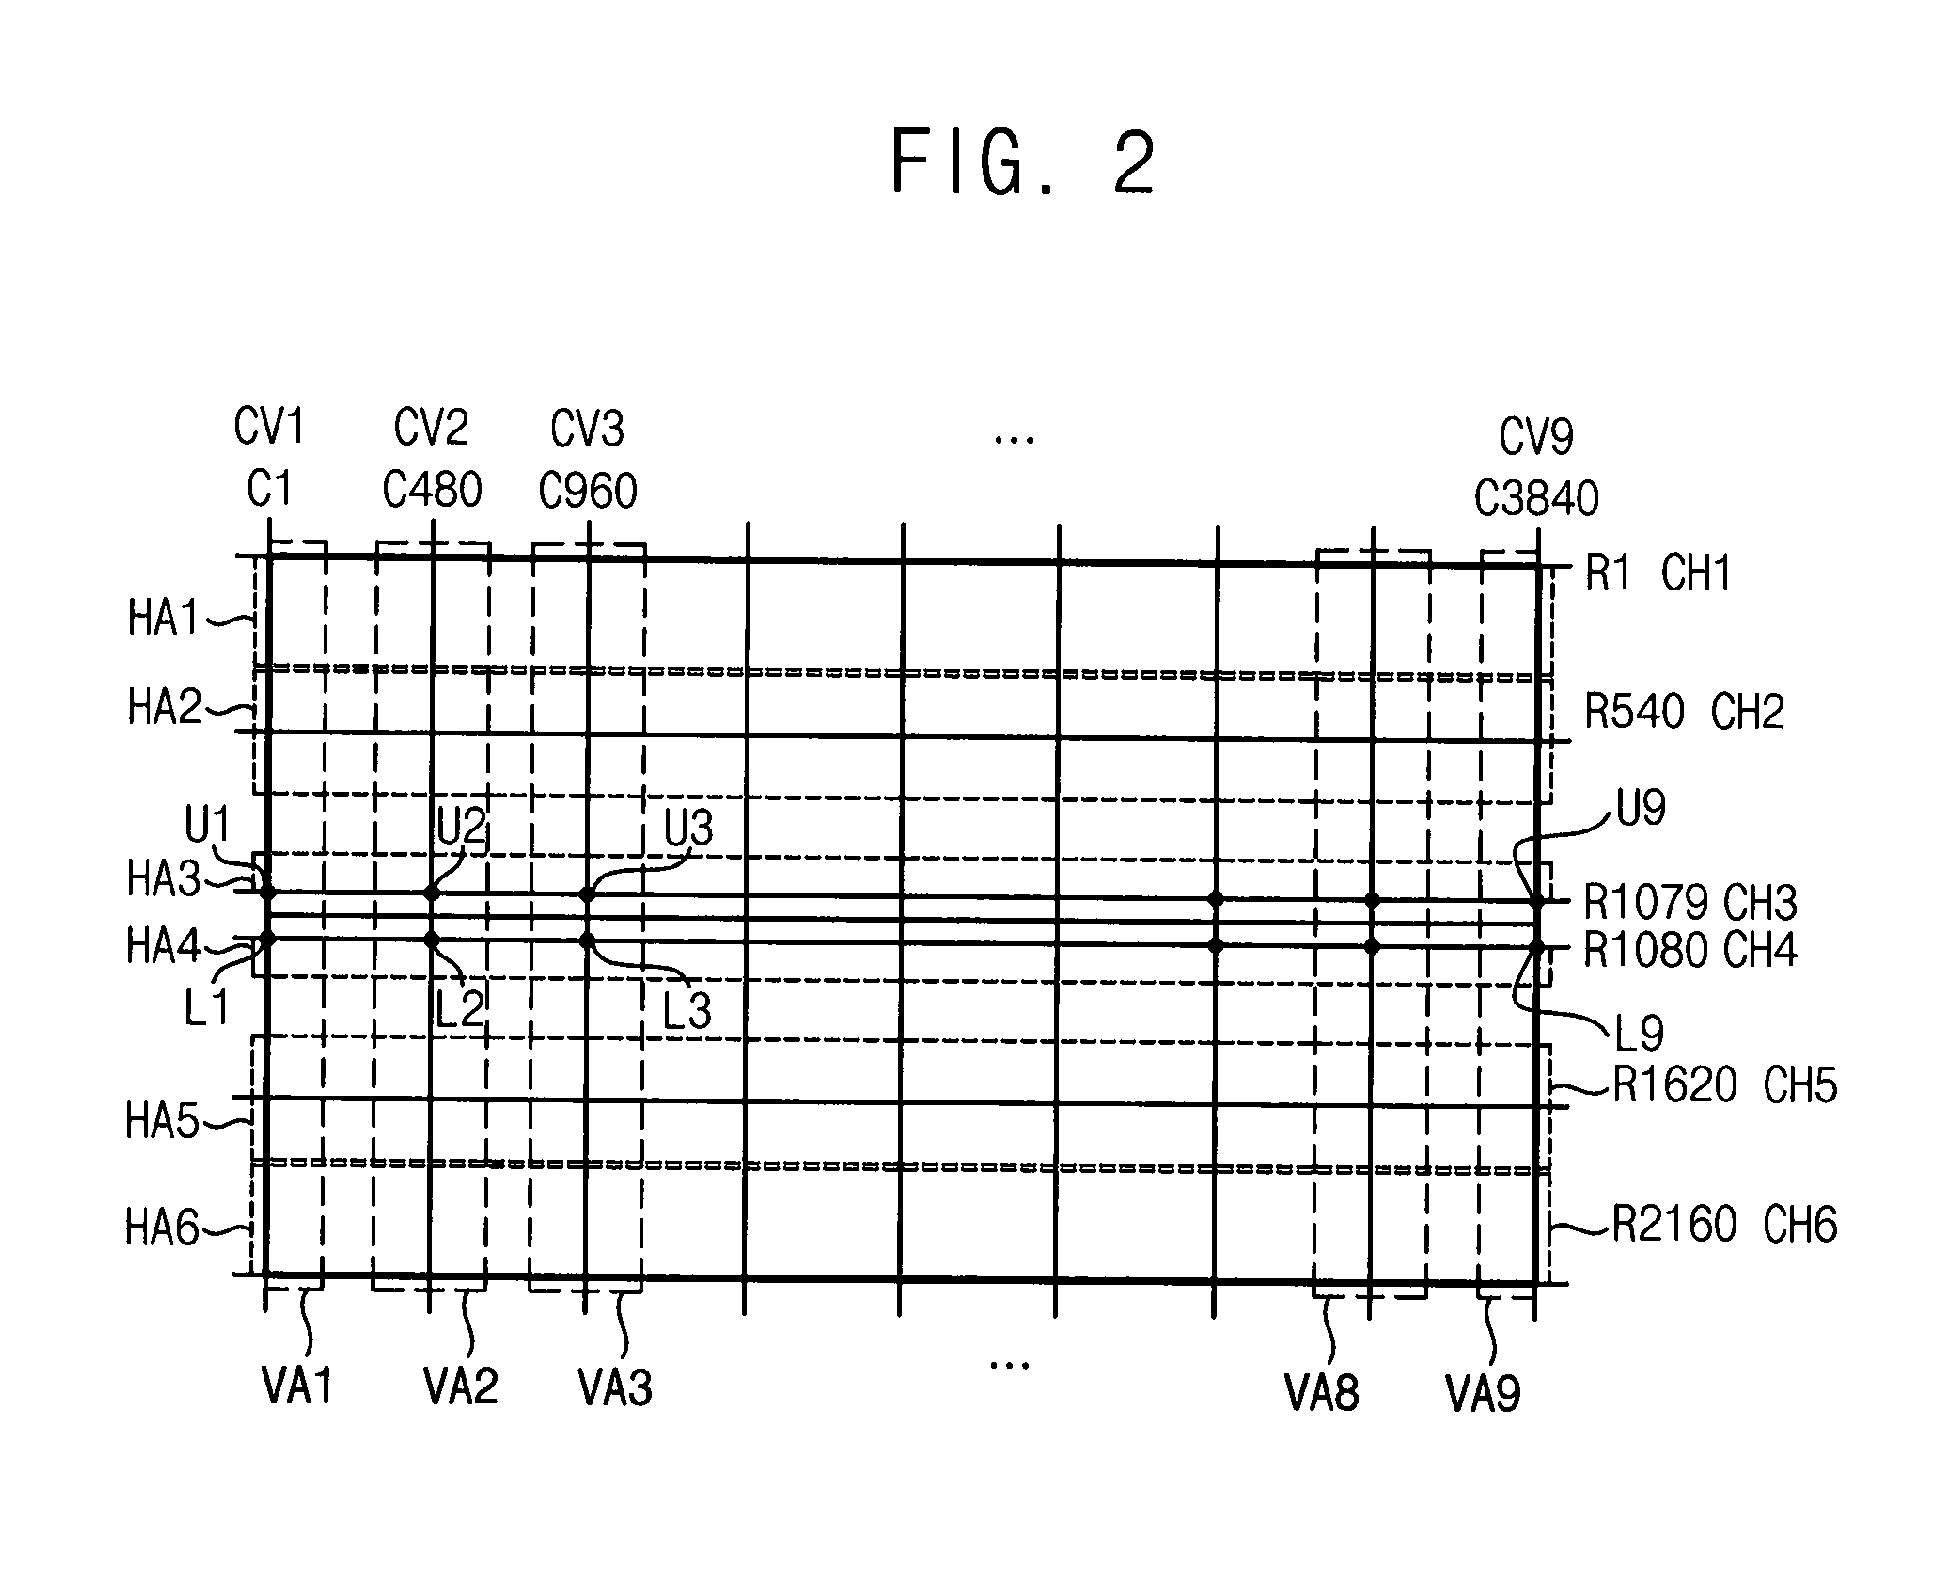 Method of compensating mura of display apparatus and vision inspection apparatus performing the method